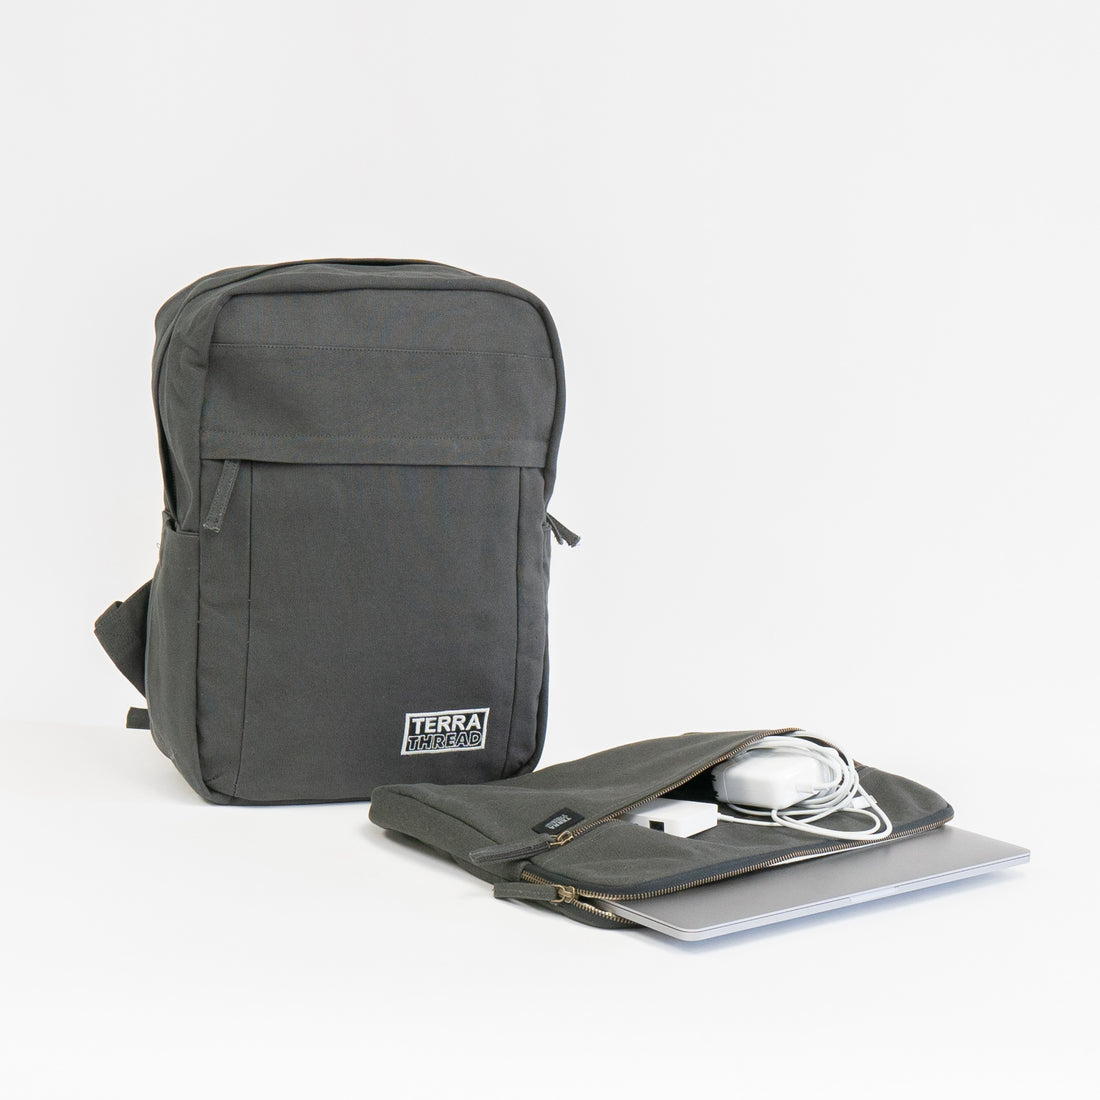 Charcoal Grey backpack and laptop sleeve set